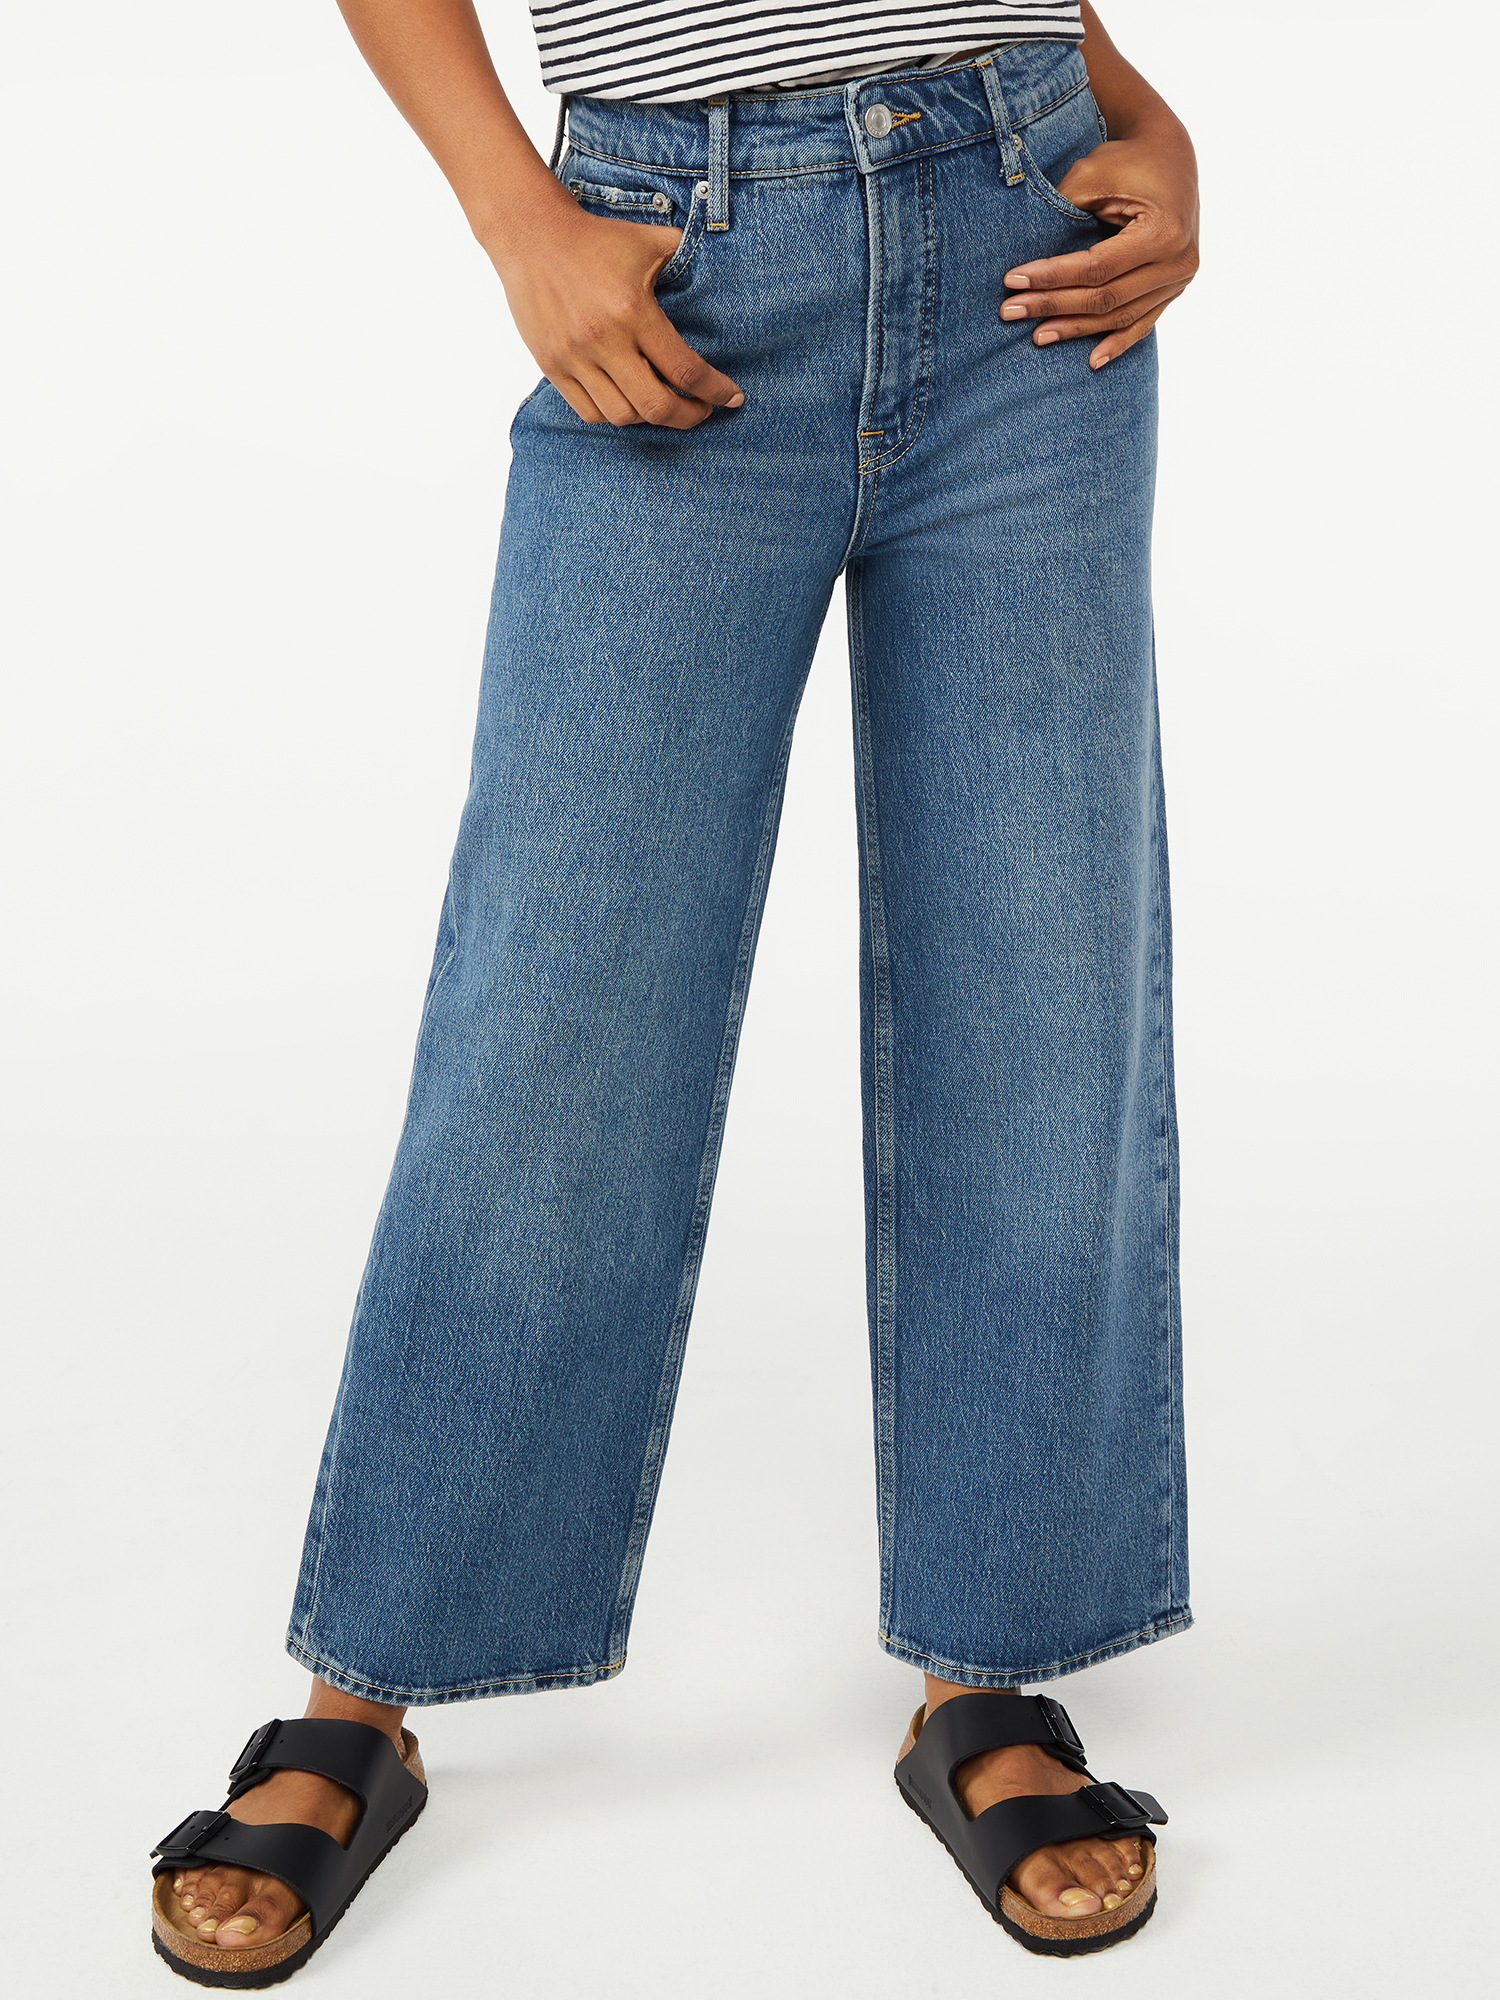 Free Assembly Women's Cropped Wide High Rise Straight Jeans - image 1 of 5